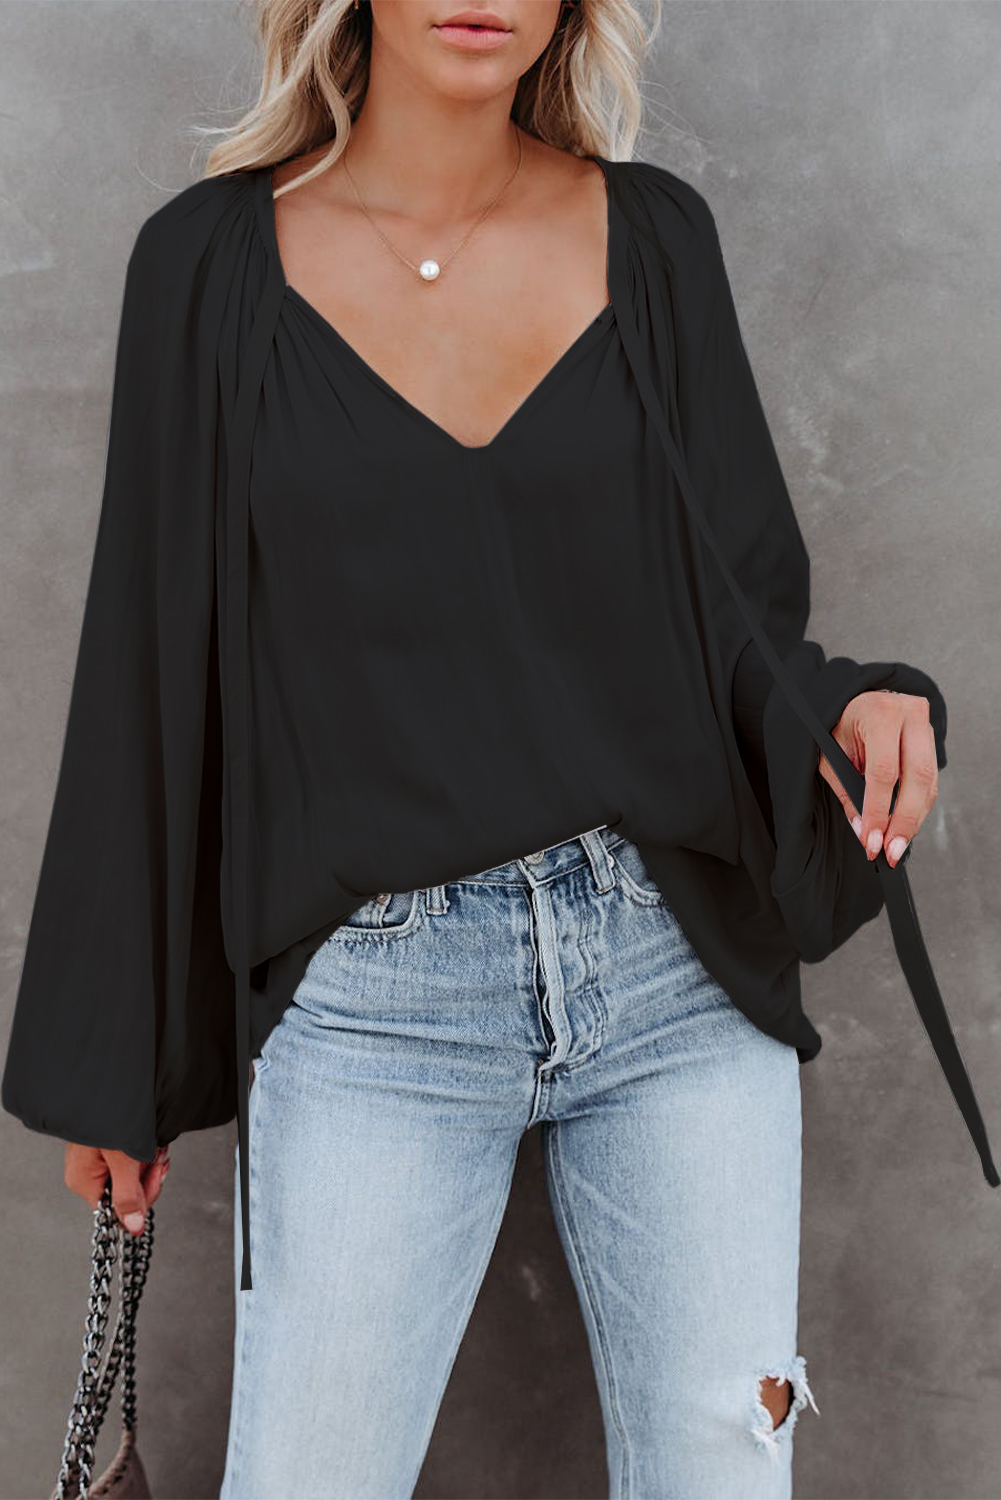 US$ 7.13 Drop-shipping Black Tie V Neck Pleated Puff Sleeve Satin ...